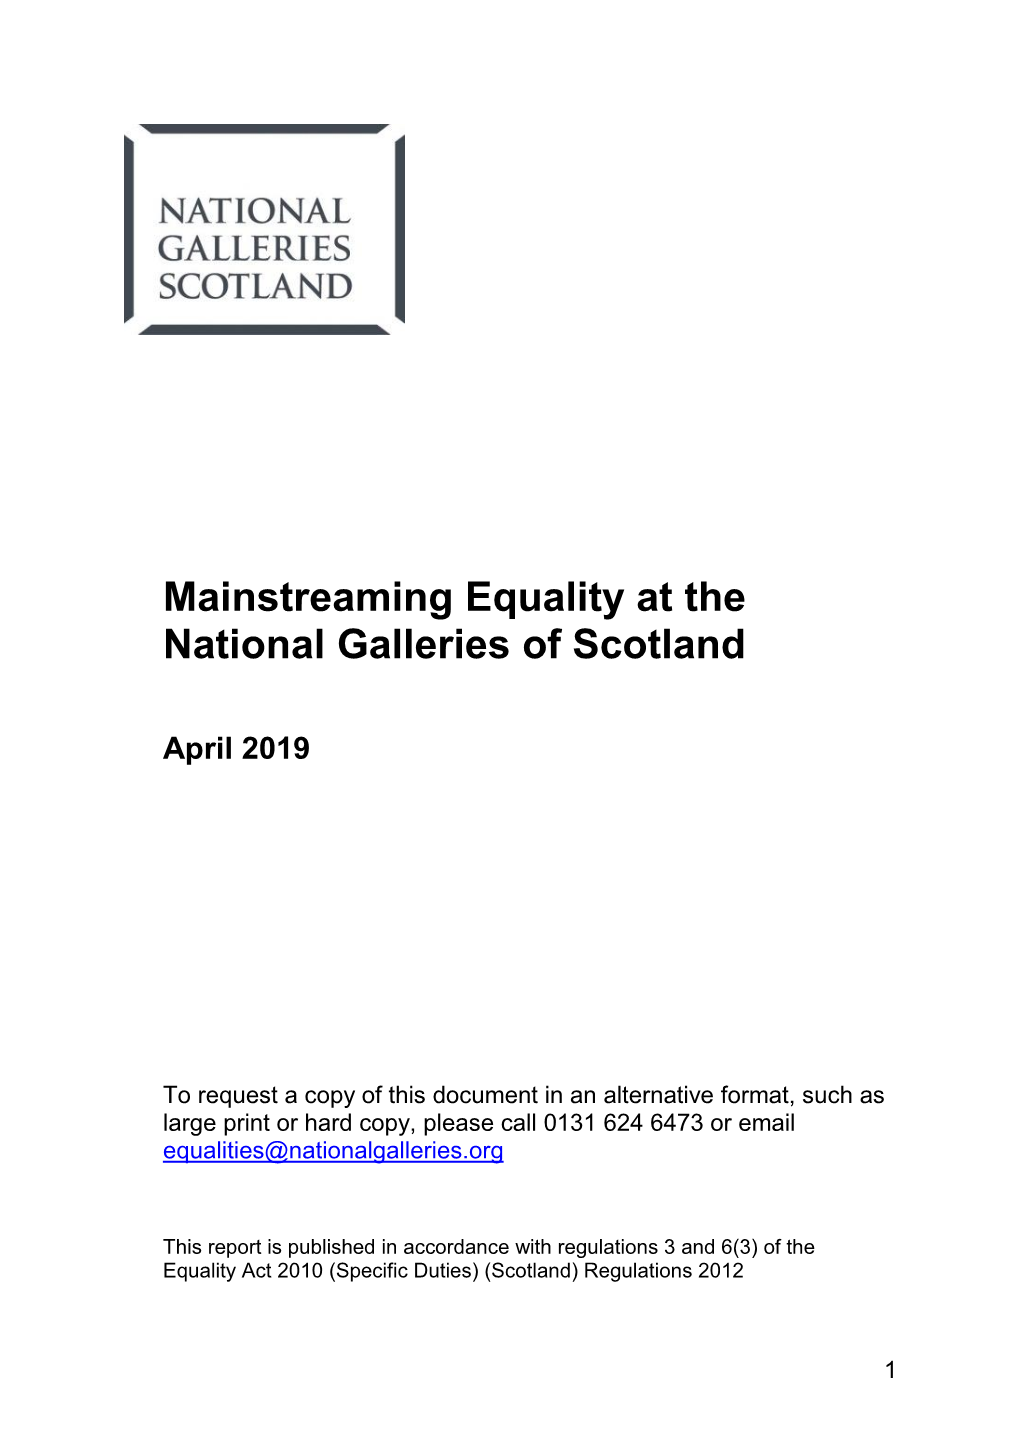 Mainstreaming Equality at the National Galleries of Scotland